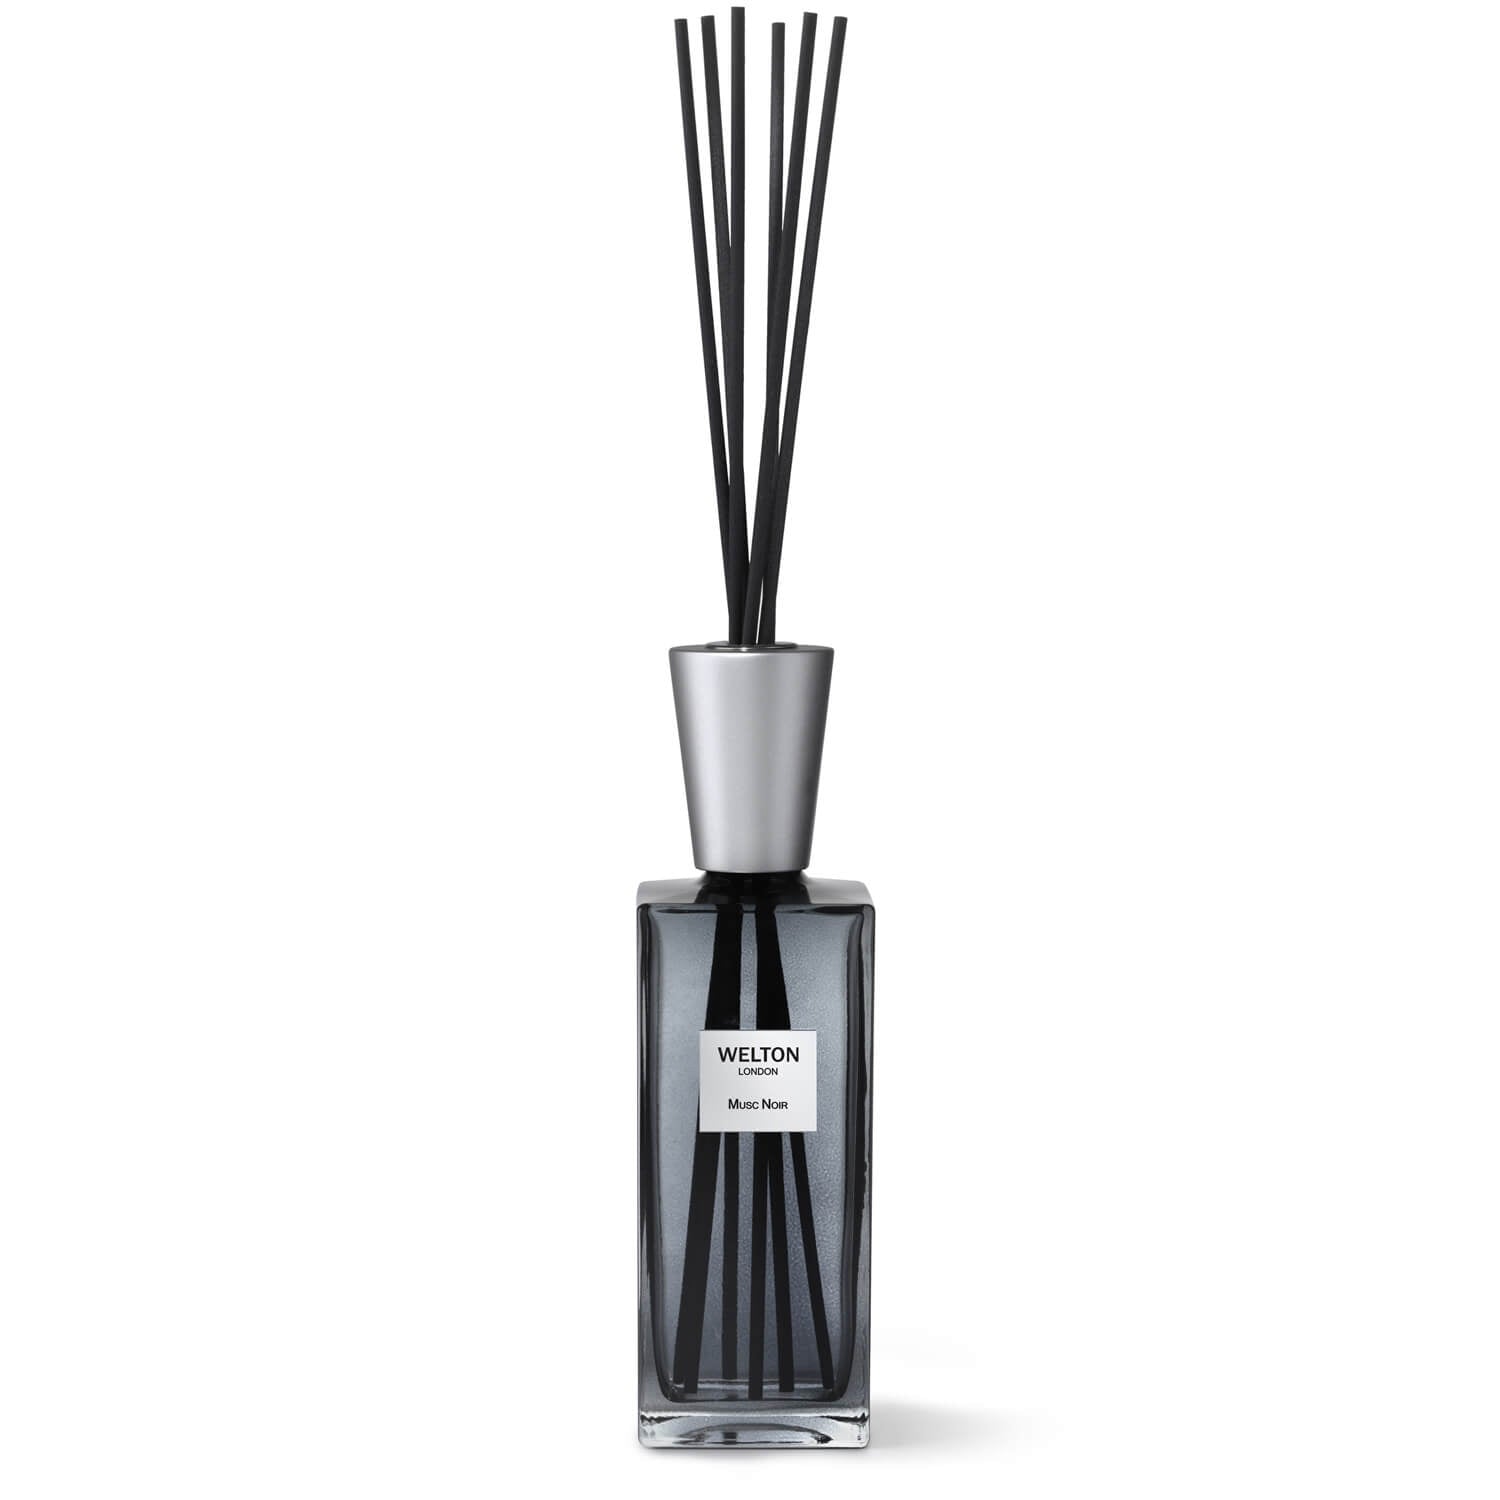 welton london diffuser musc noir xlfloral musky diffusers 